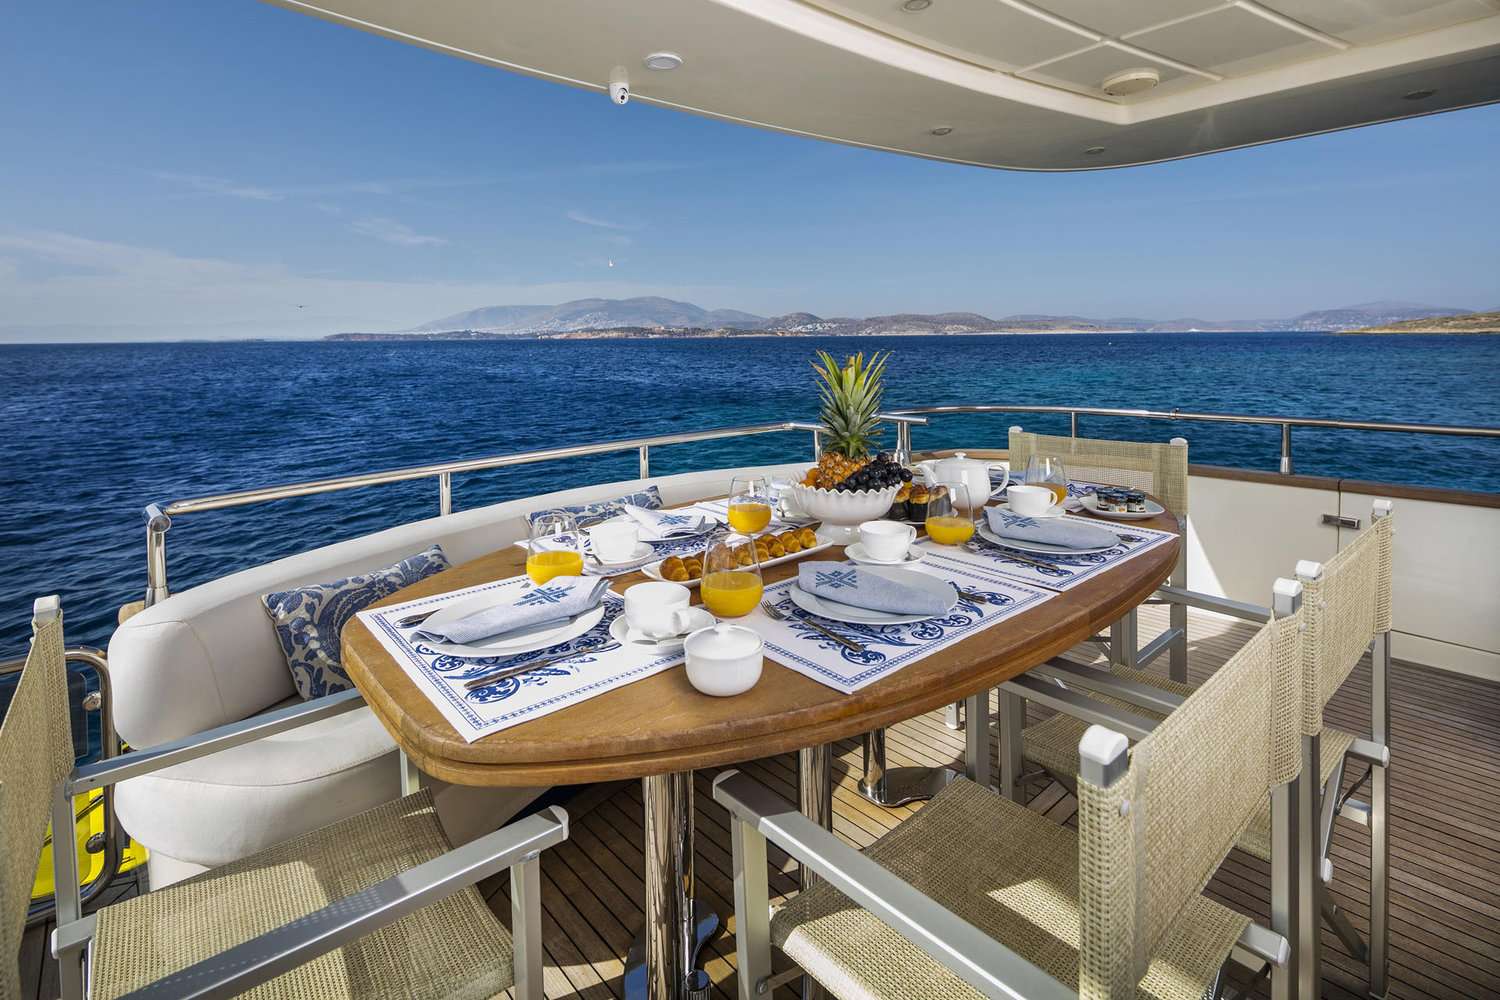 GORGEOUS Yacht Charter - Aft deck morning view